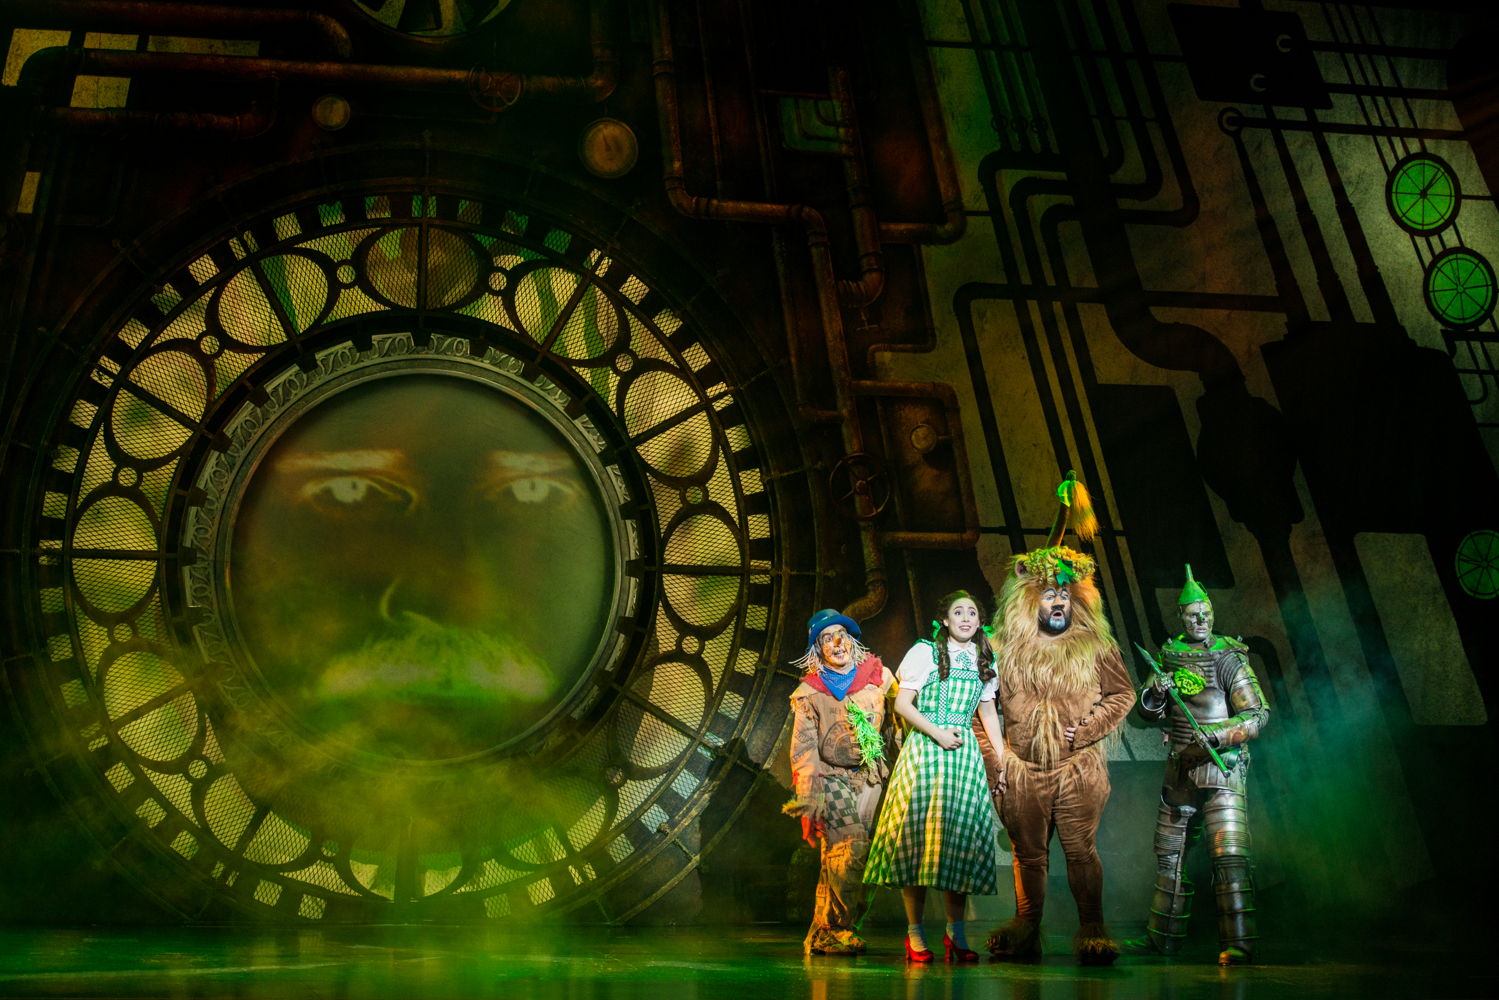  Mark A. Harmon as The Wizard, Morgan Reynolds as Scarecrow, Sarah Lasko as
Dorothy, Aaron Fried as Lion and Jay McGill as Tin Man in the Wizard’s Chambers
Photo credit: DANIEL A. SWALEC